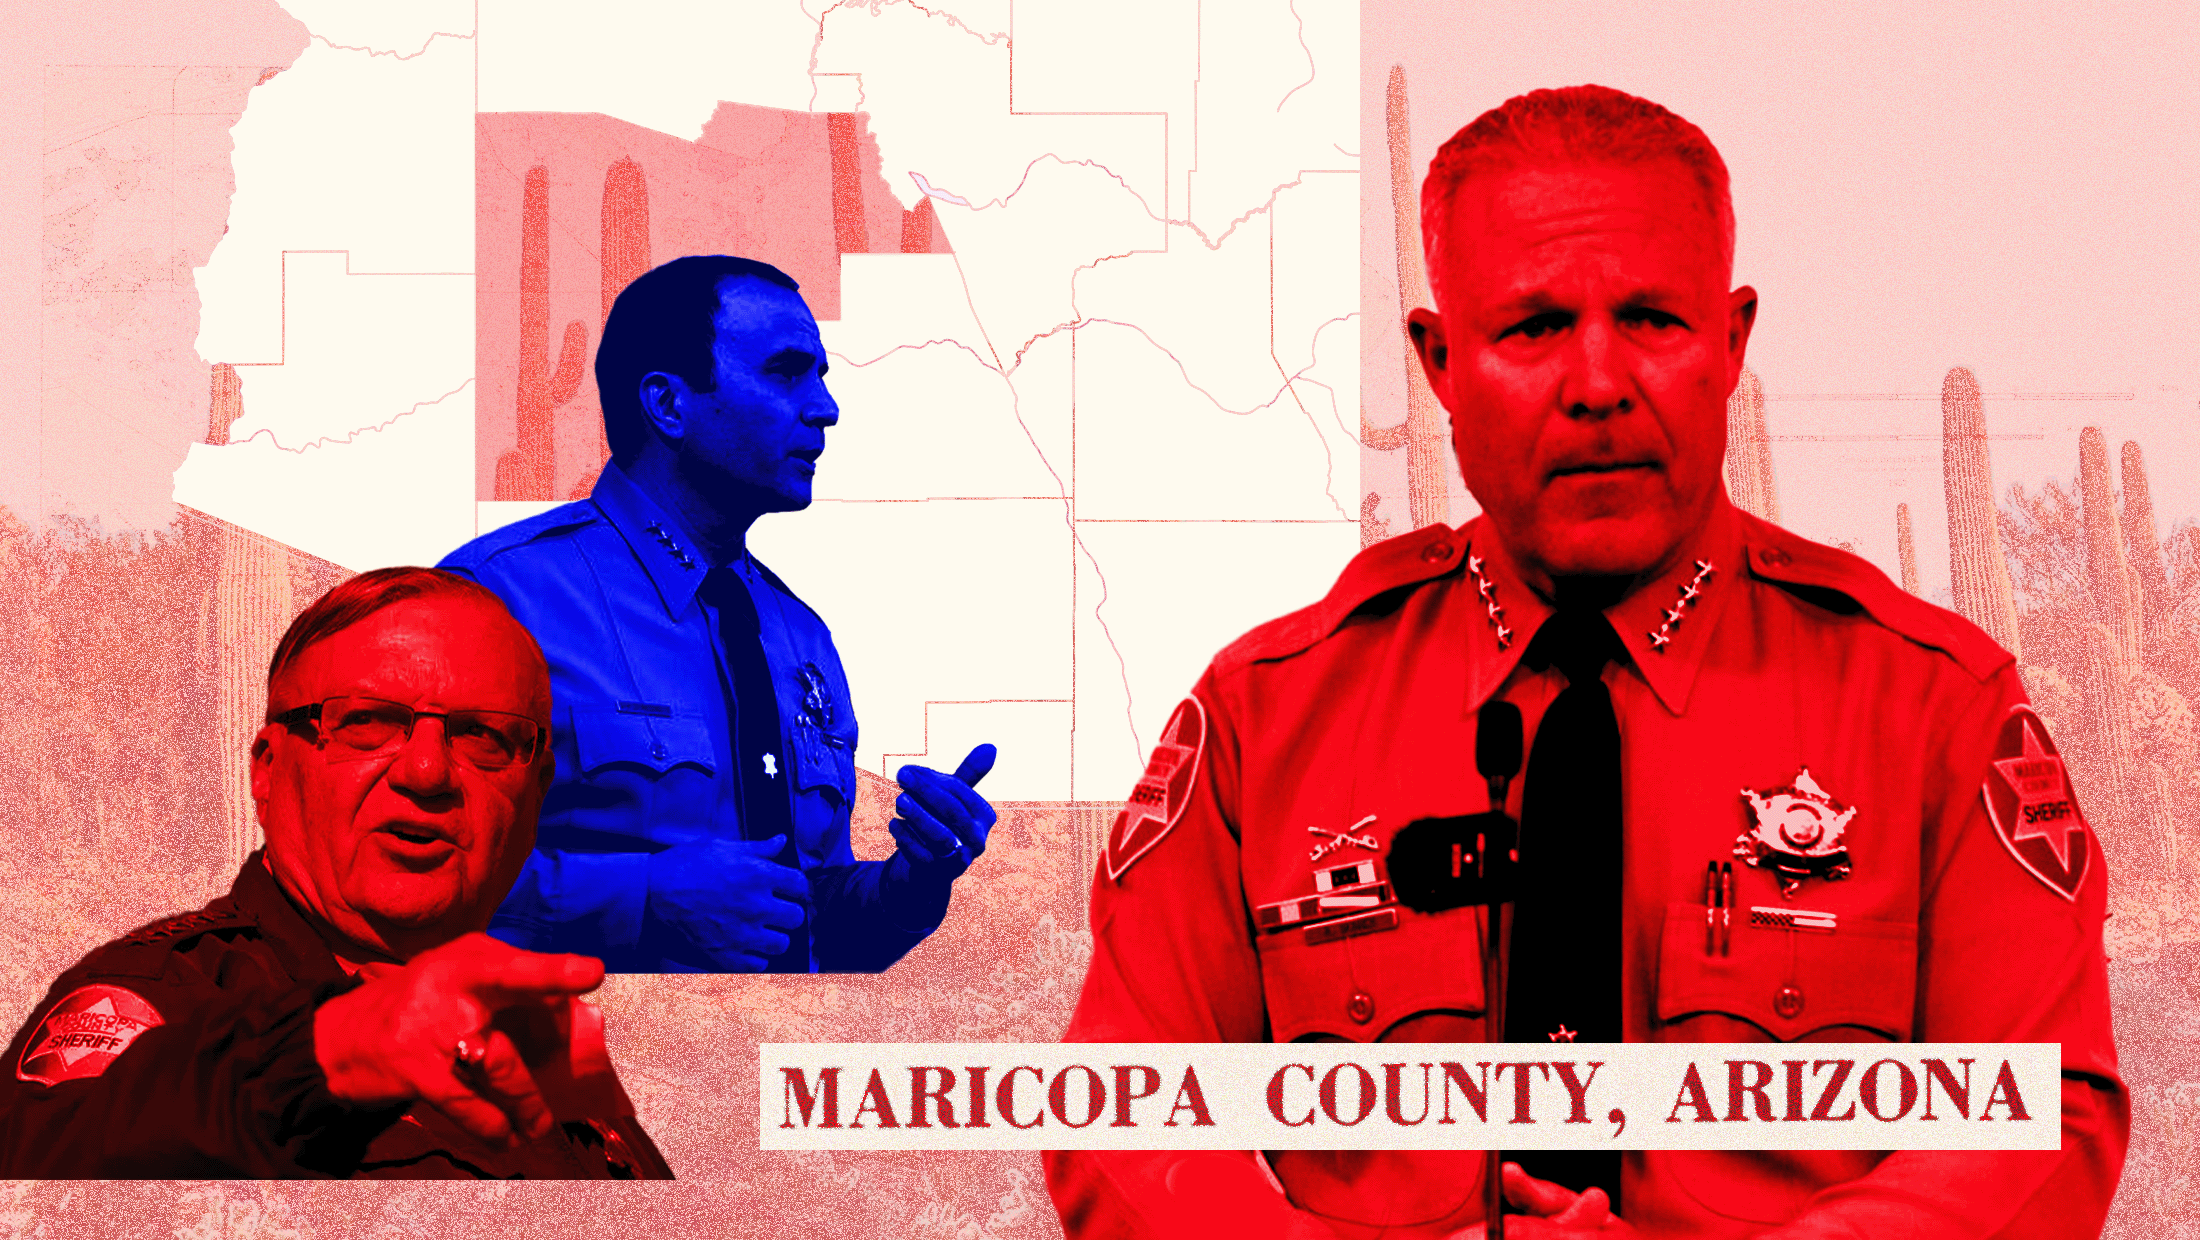 Red background with textured cacti in the background and the state of Arizona and red-toned images of former Maricopa County sheriff Joe Arpaio (on the left) and Russell Skinner (on the right) and a blue-toned image of Paul Penzone. In the bottom right corner reads "MARICOPA COUNTY, ARIZONA" in all caps.